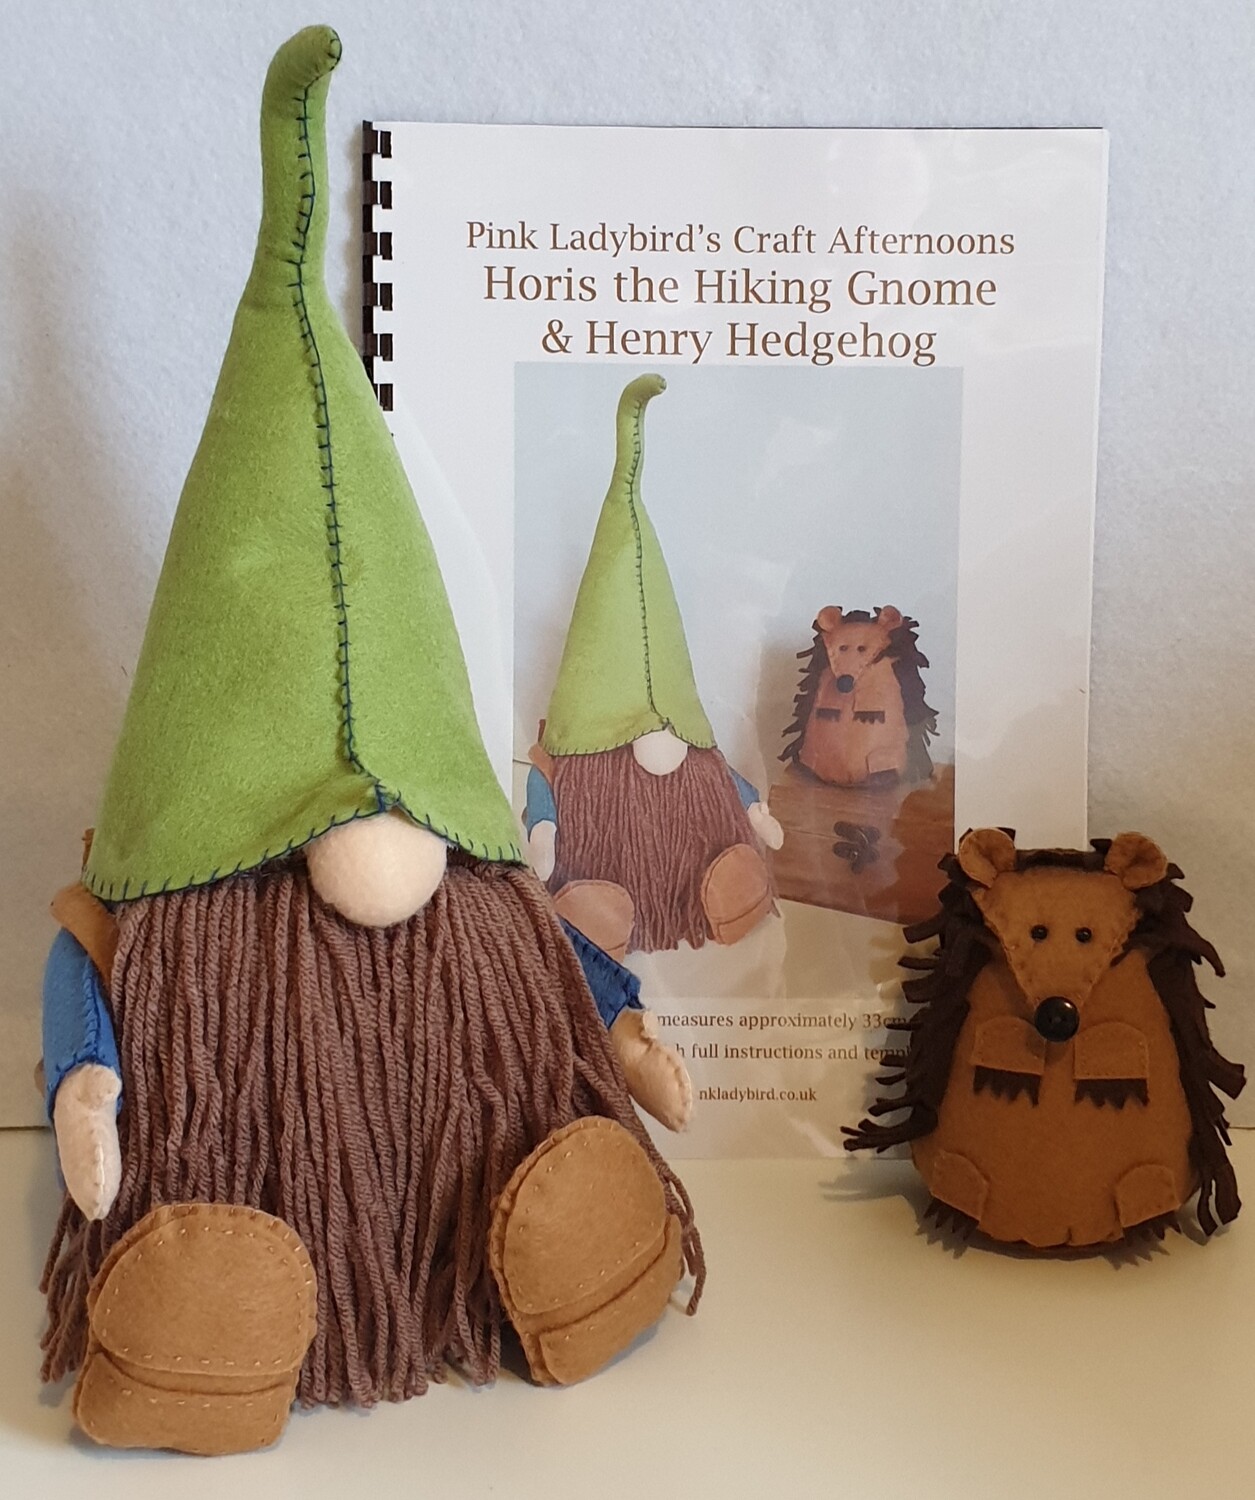 Sewing Pattern Booklet. Horis the hiking gnome & Henry Hedgehog